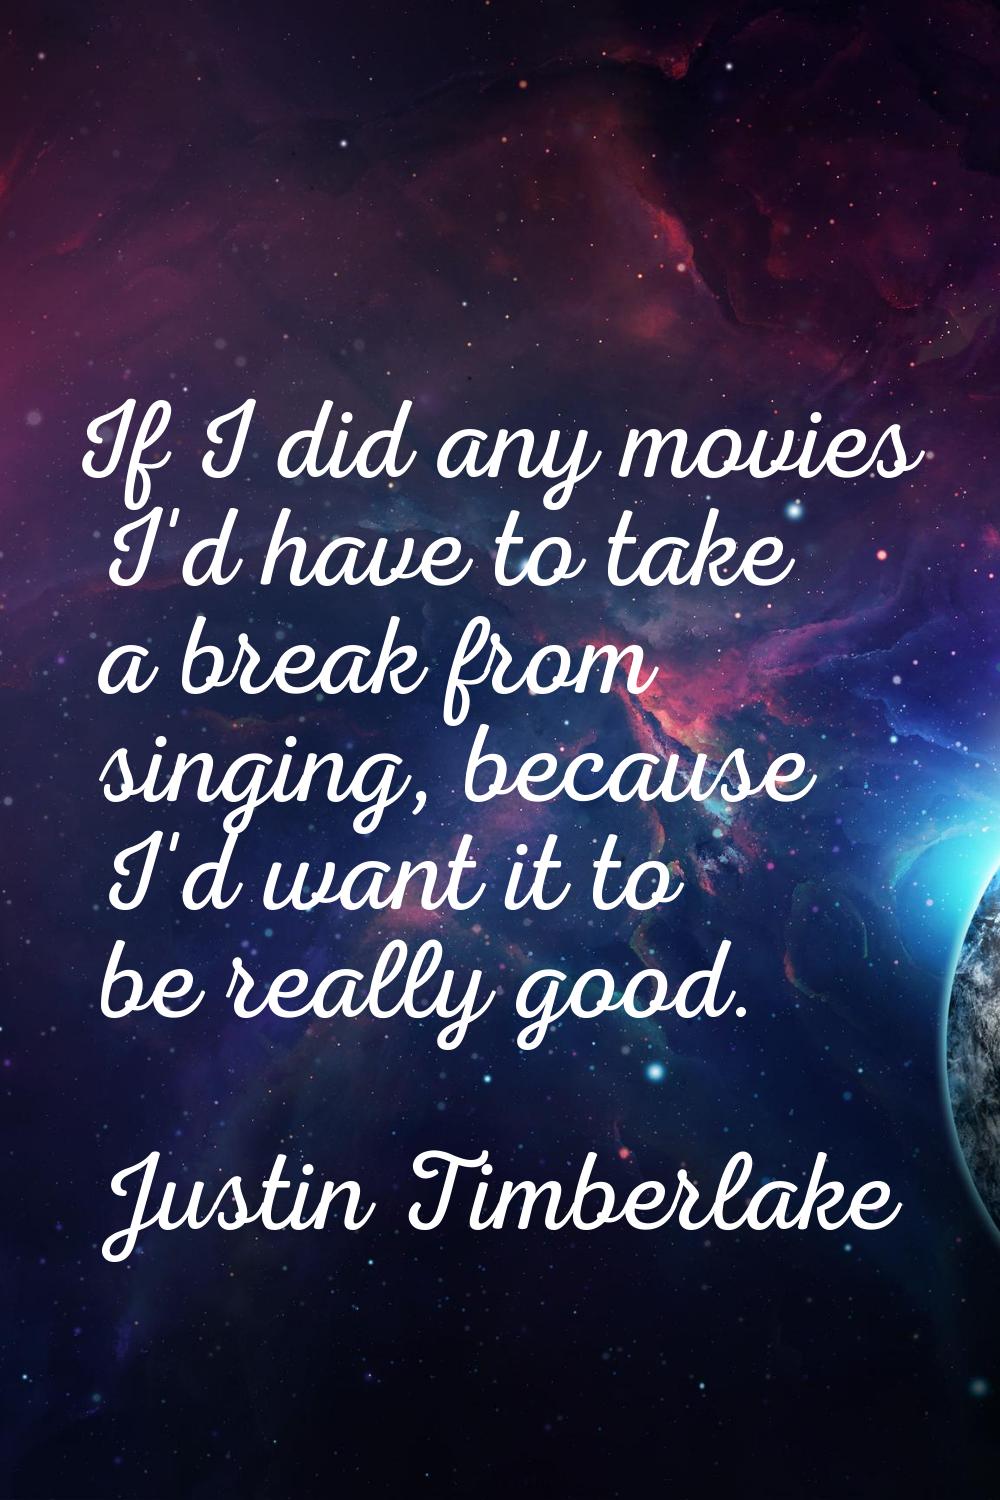 If I did any movies I'd have to take a break from singing, because I'd want it to be really good.